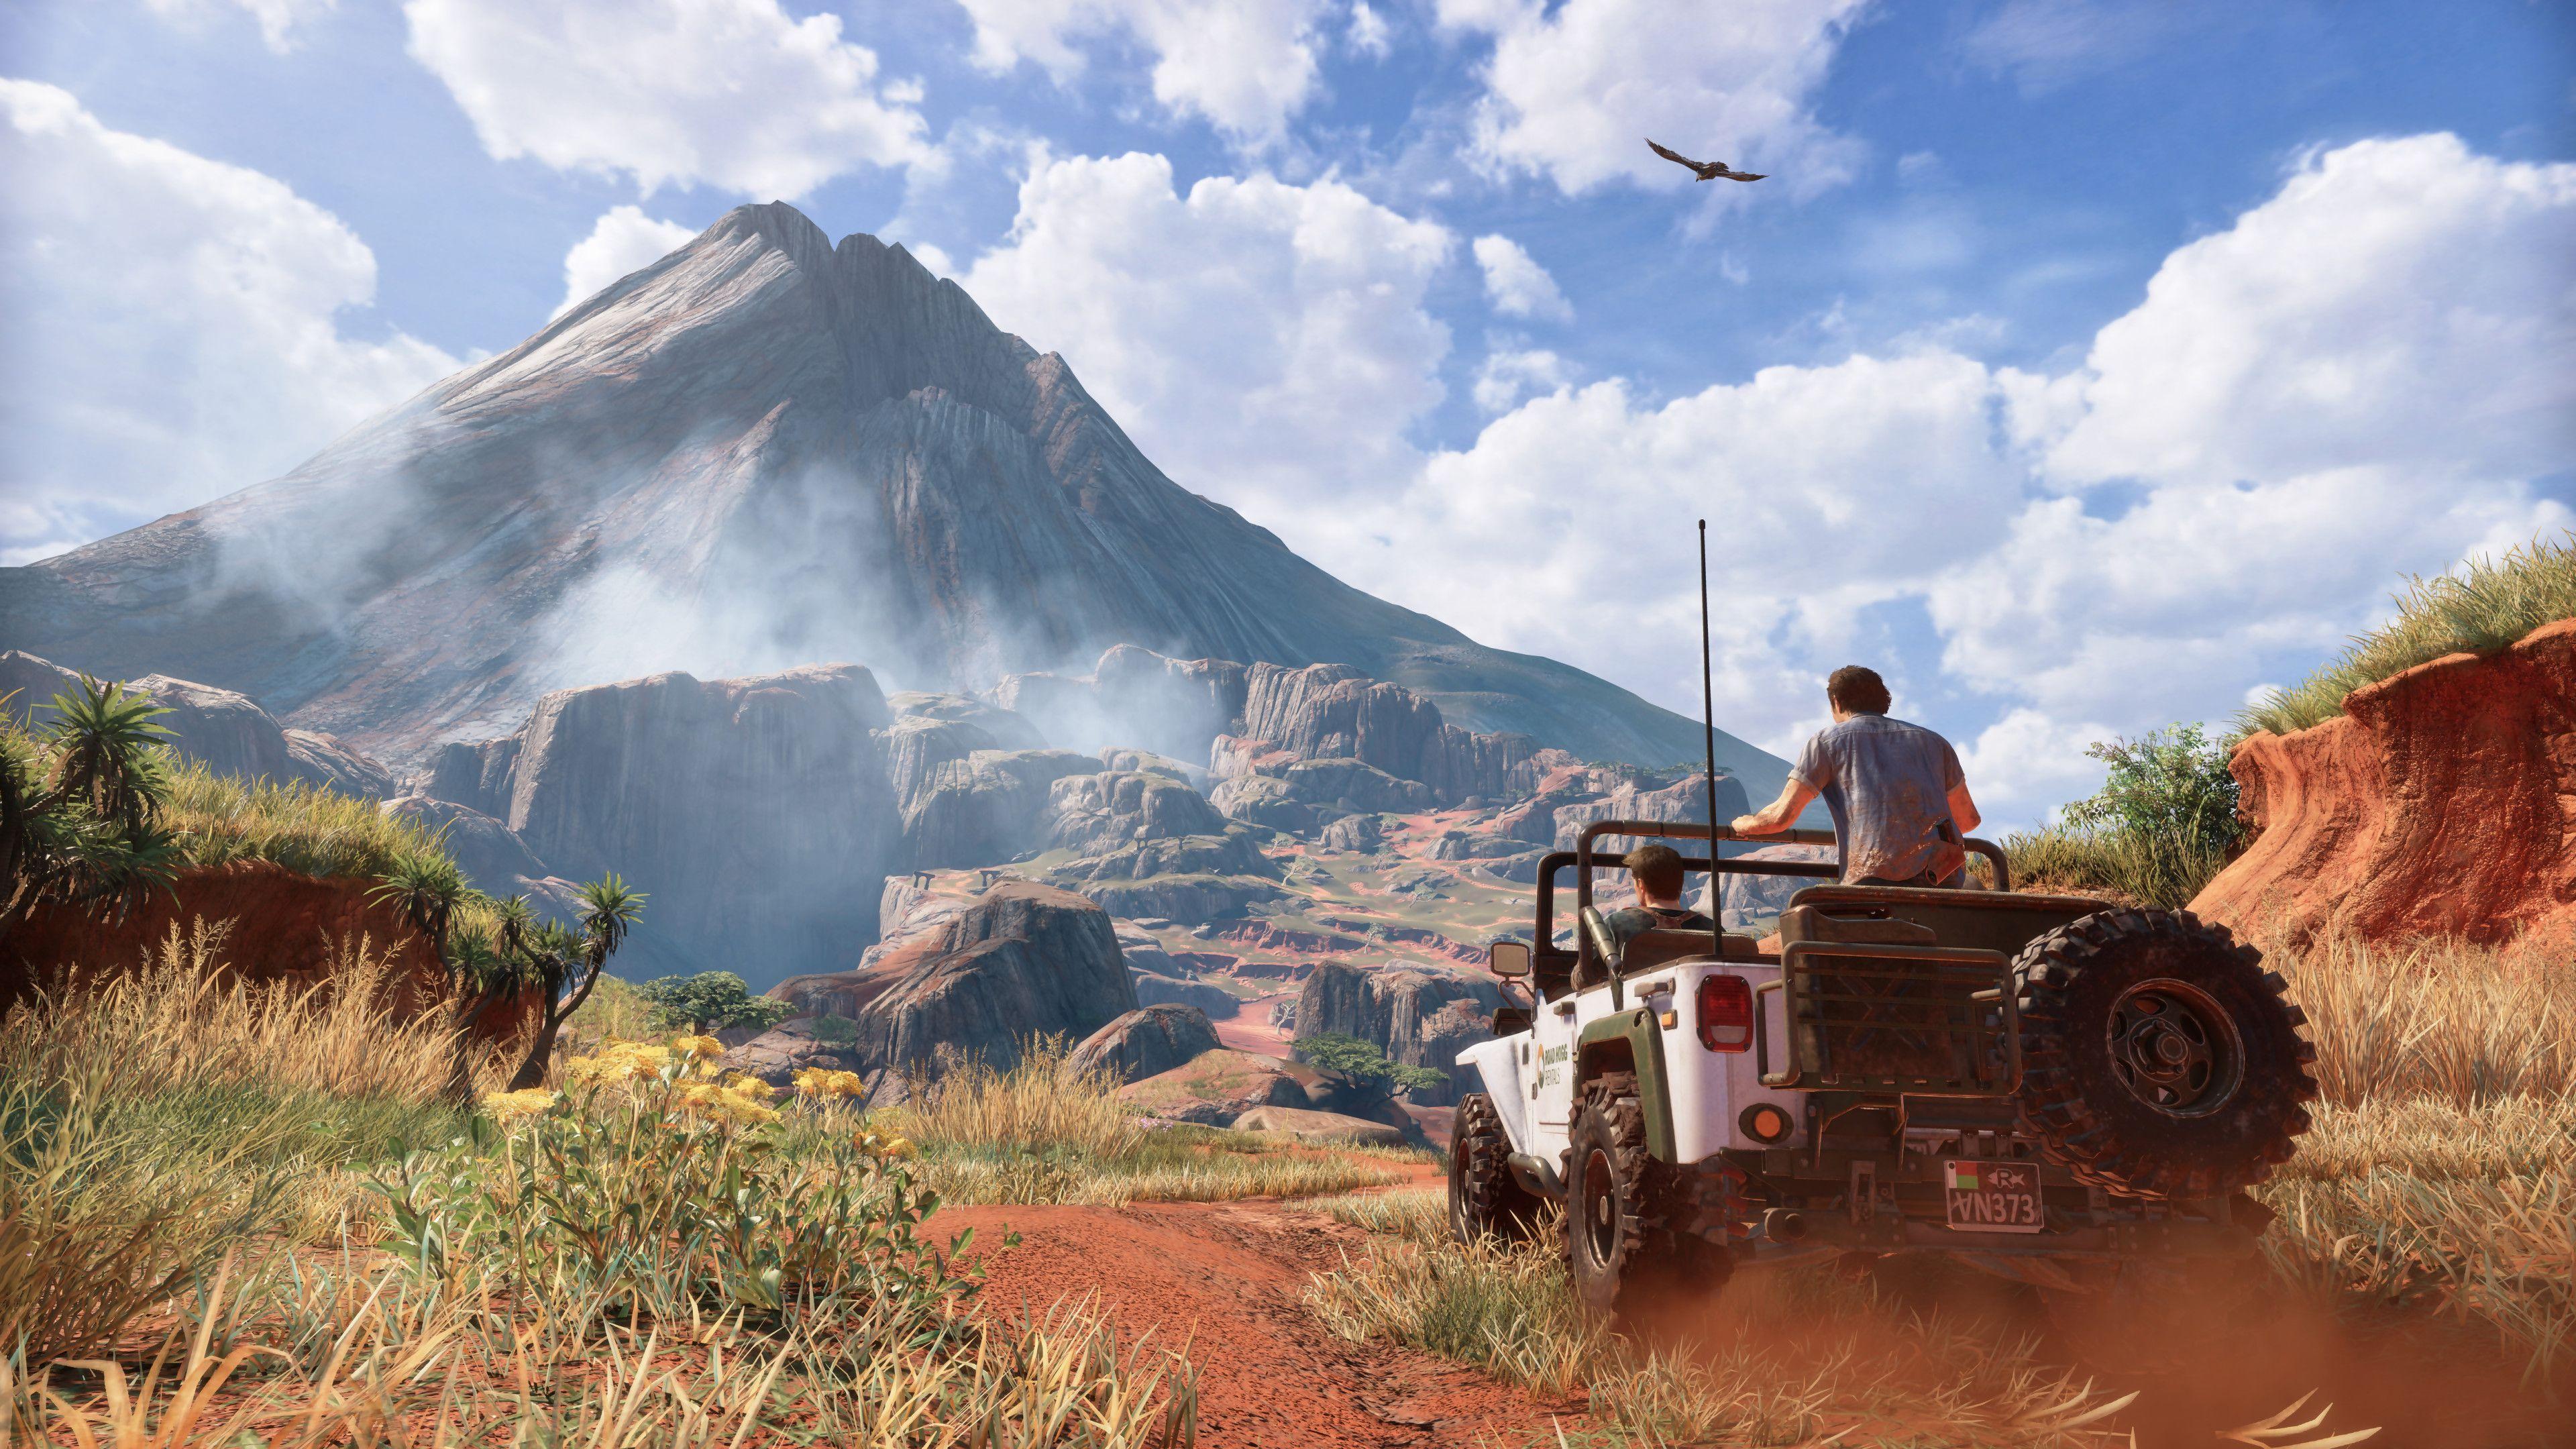 uncharted 4 game download free